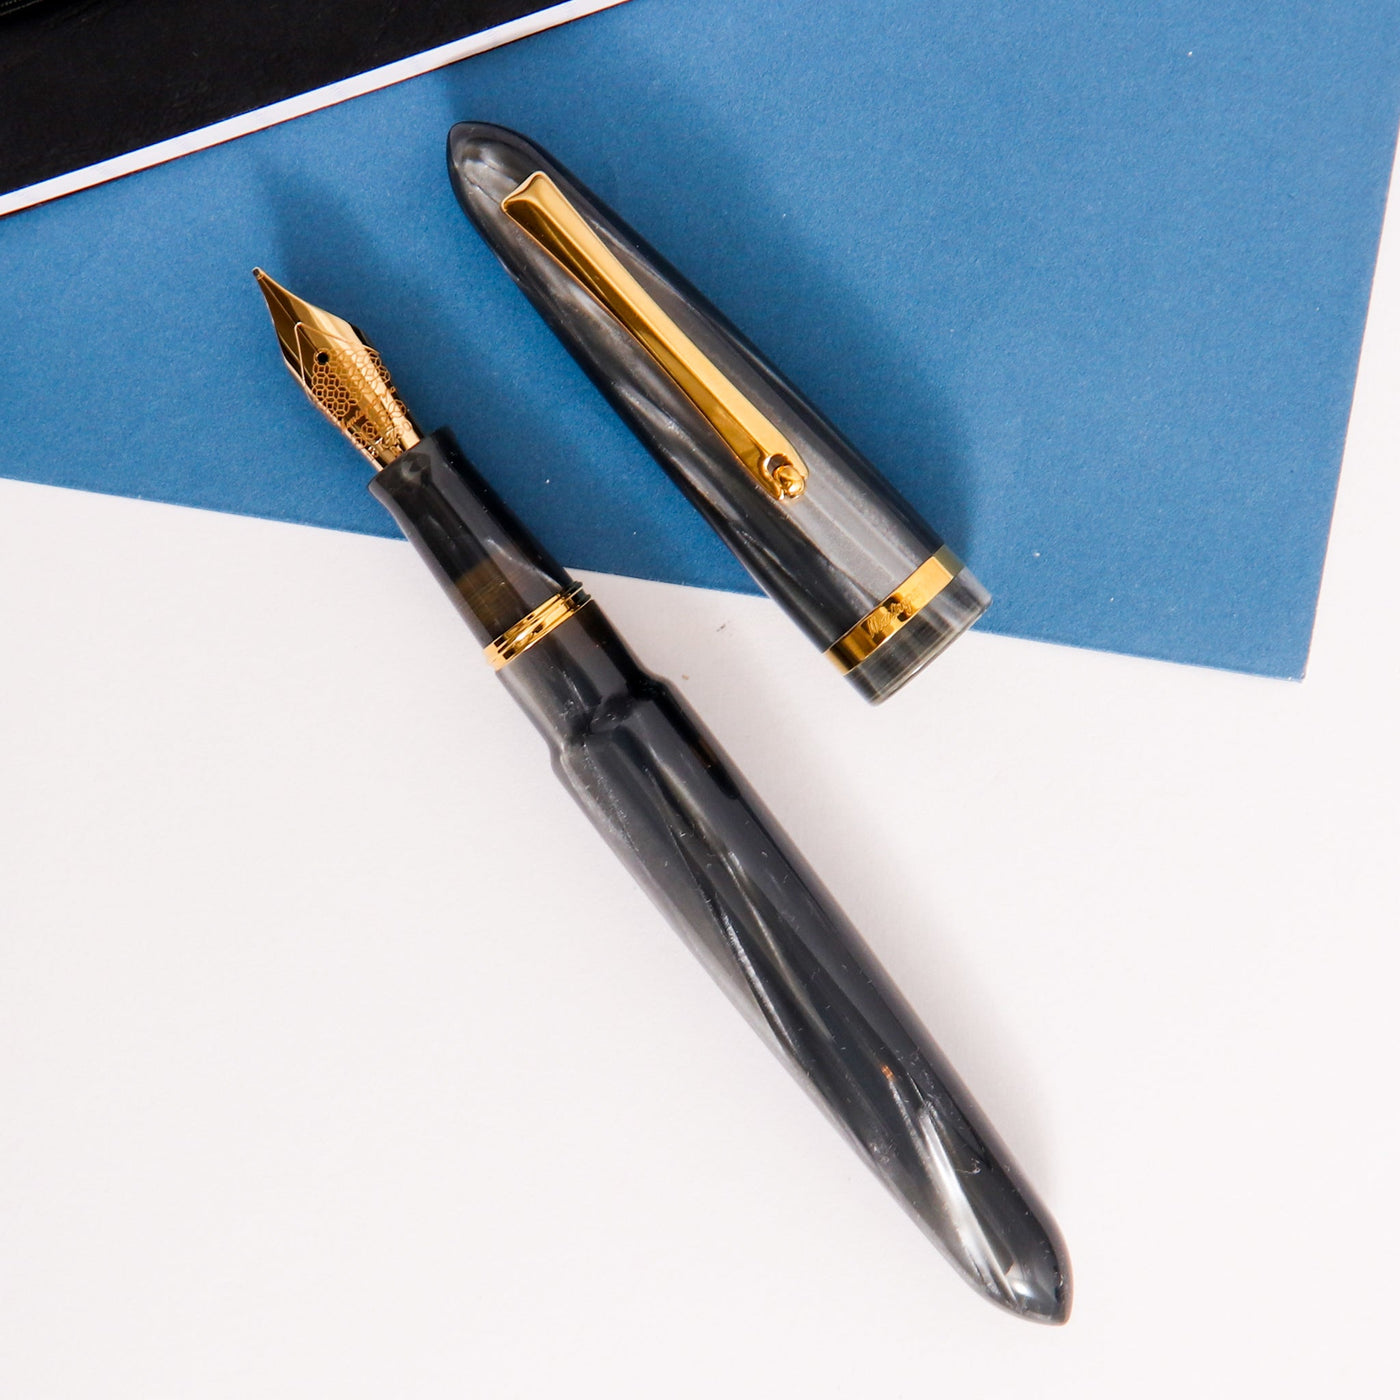 Montegrappa-Venetia-Celluloid-Pearl-Grey-With-Gold-Trim